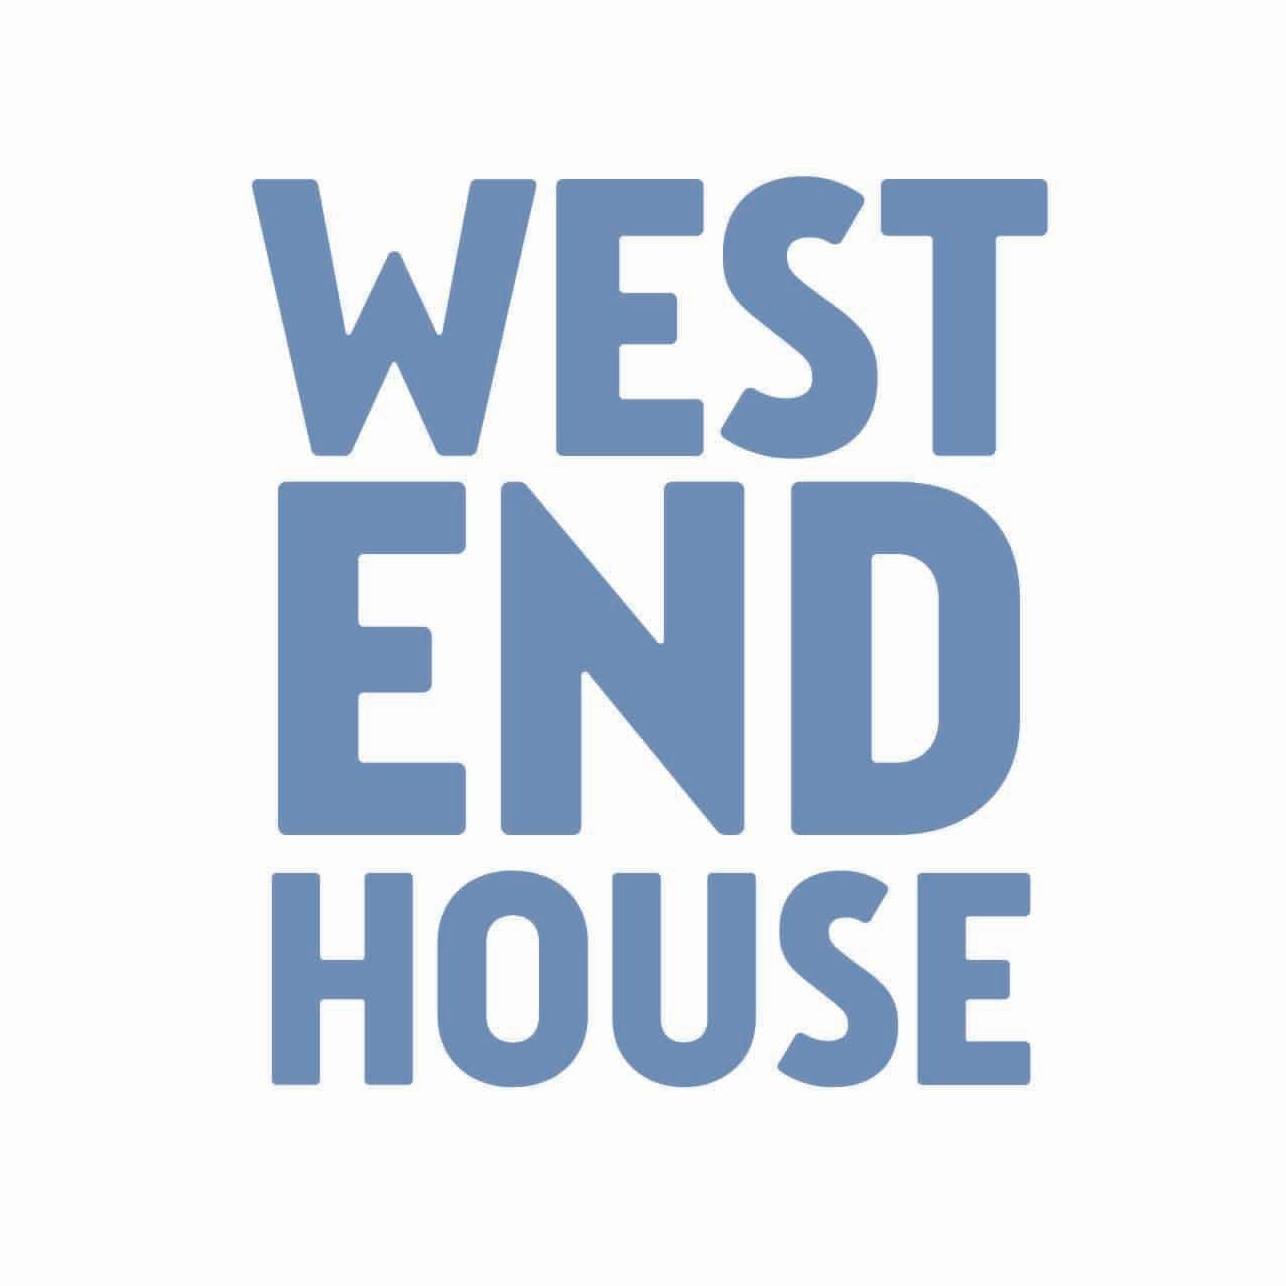 West End House